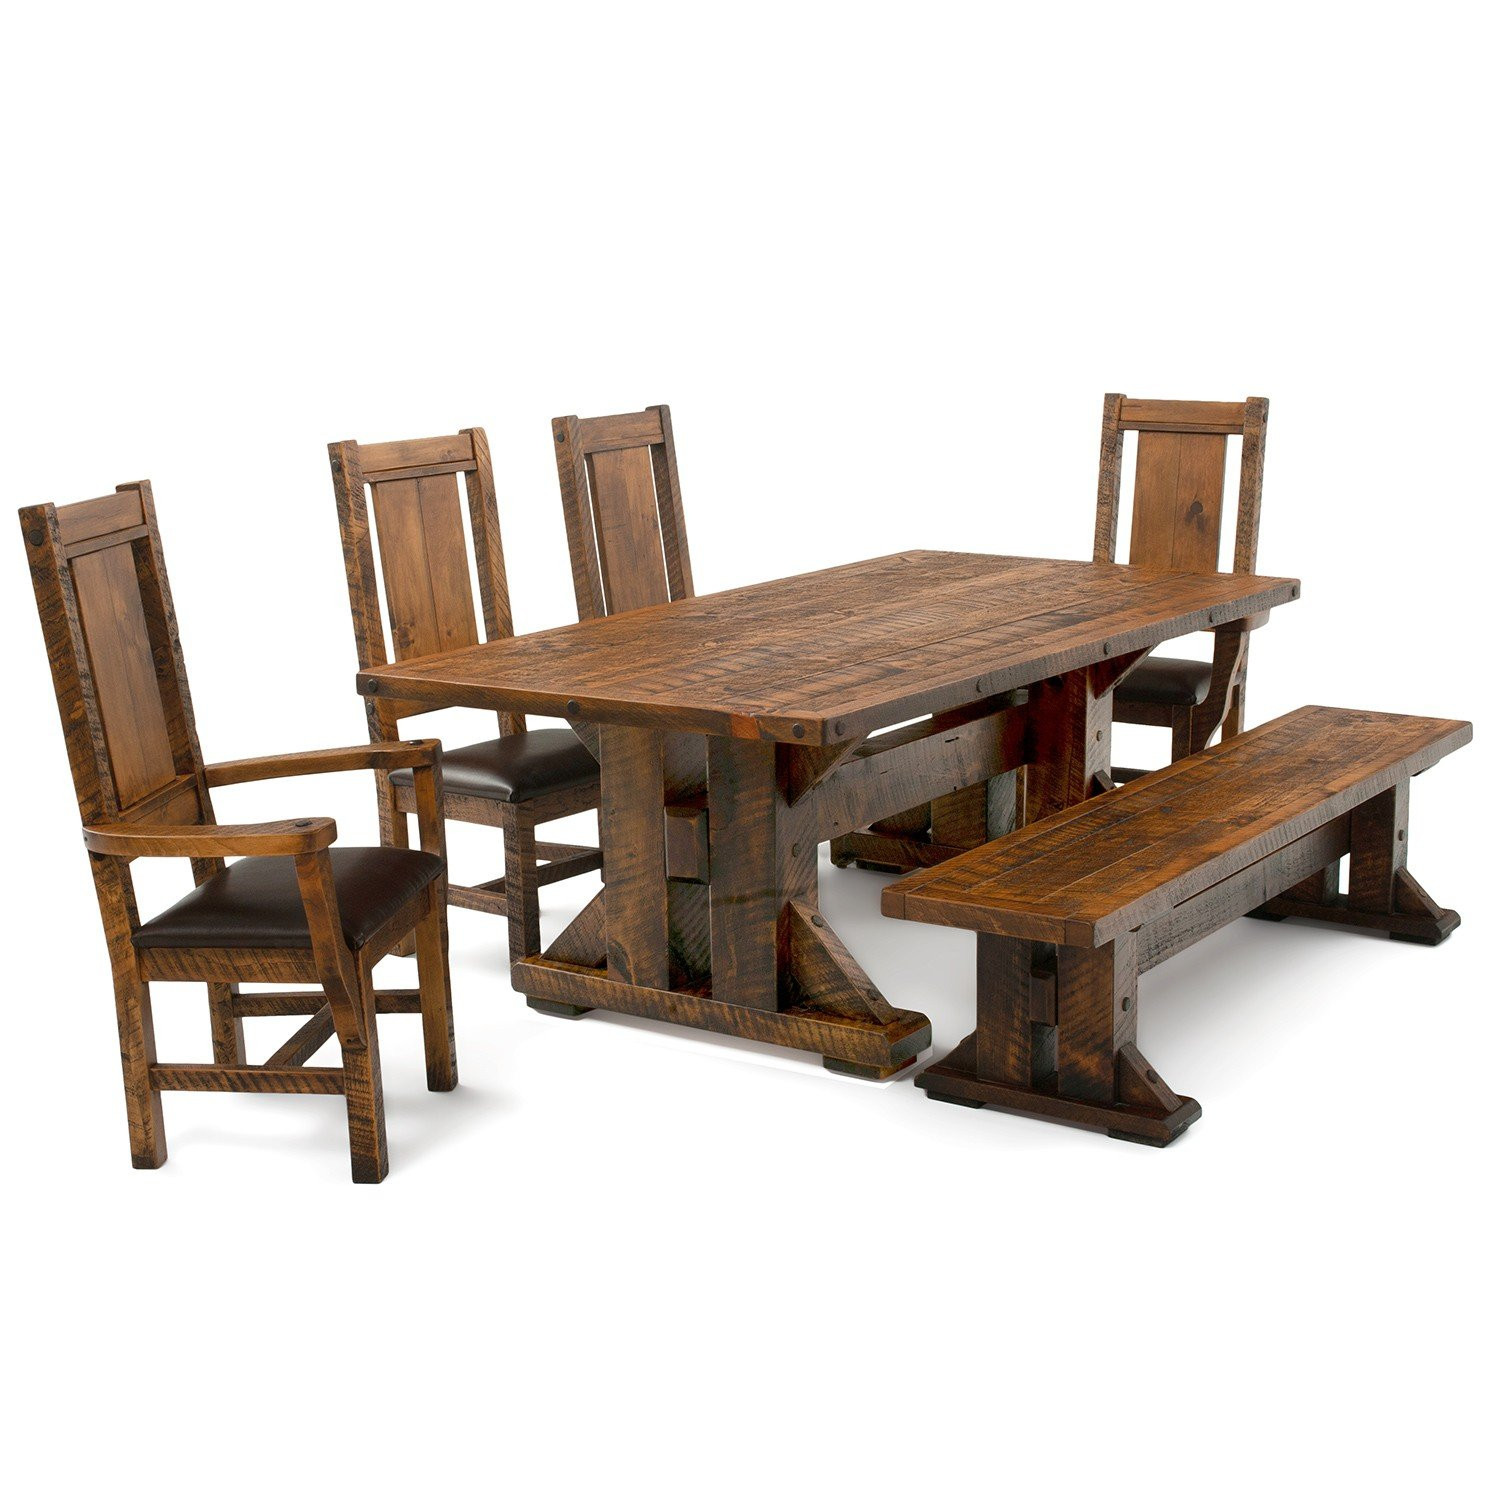 Rustic Kitchen Tables With Bench
 Timber Haven Rustic Dining Table